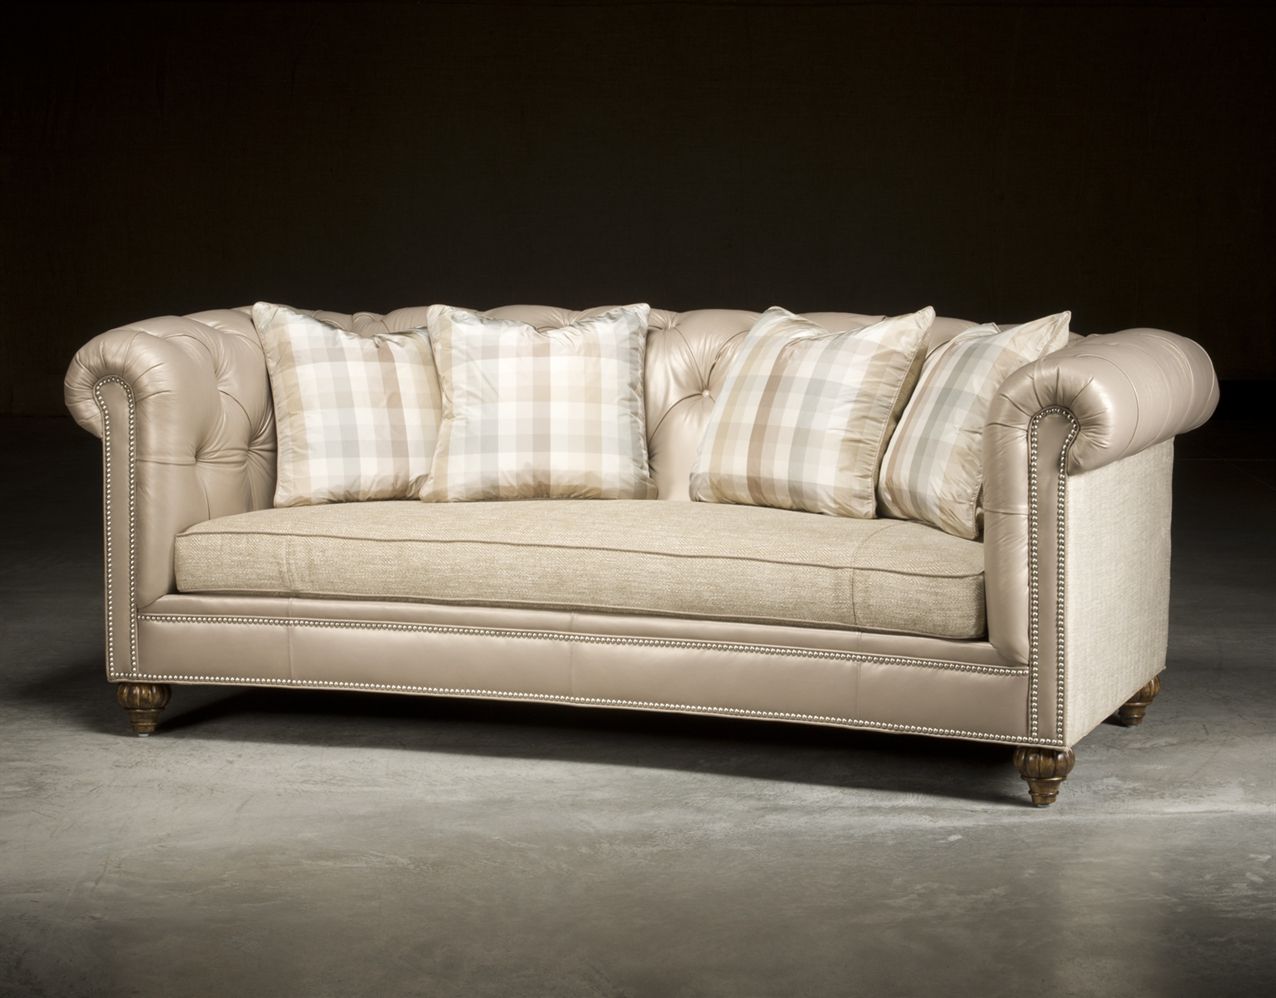 Chesterfield Tufted Sofa, High End Upholstered Furniture Throughout Most Popular Tufted Upholstered Sofas (View 14 of 15)